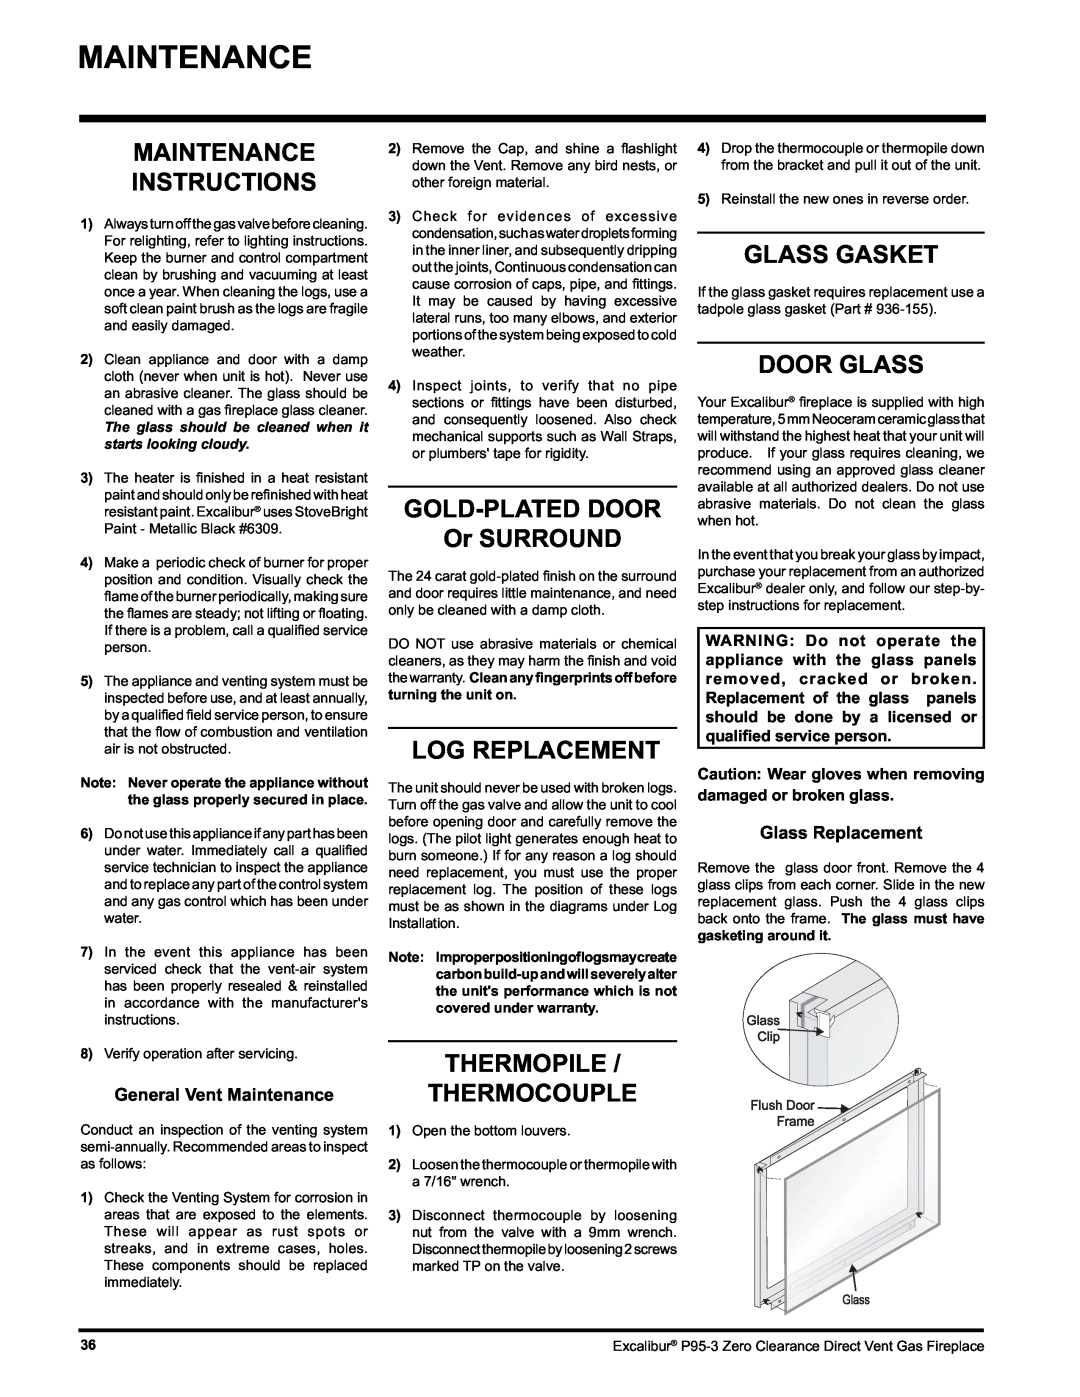 Excalibur electronic P95-NG3 Maintenance Instructions, GOLD-PLATEDDOOR Or SURROUND, Log Replacement, Glass Gasket 